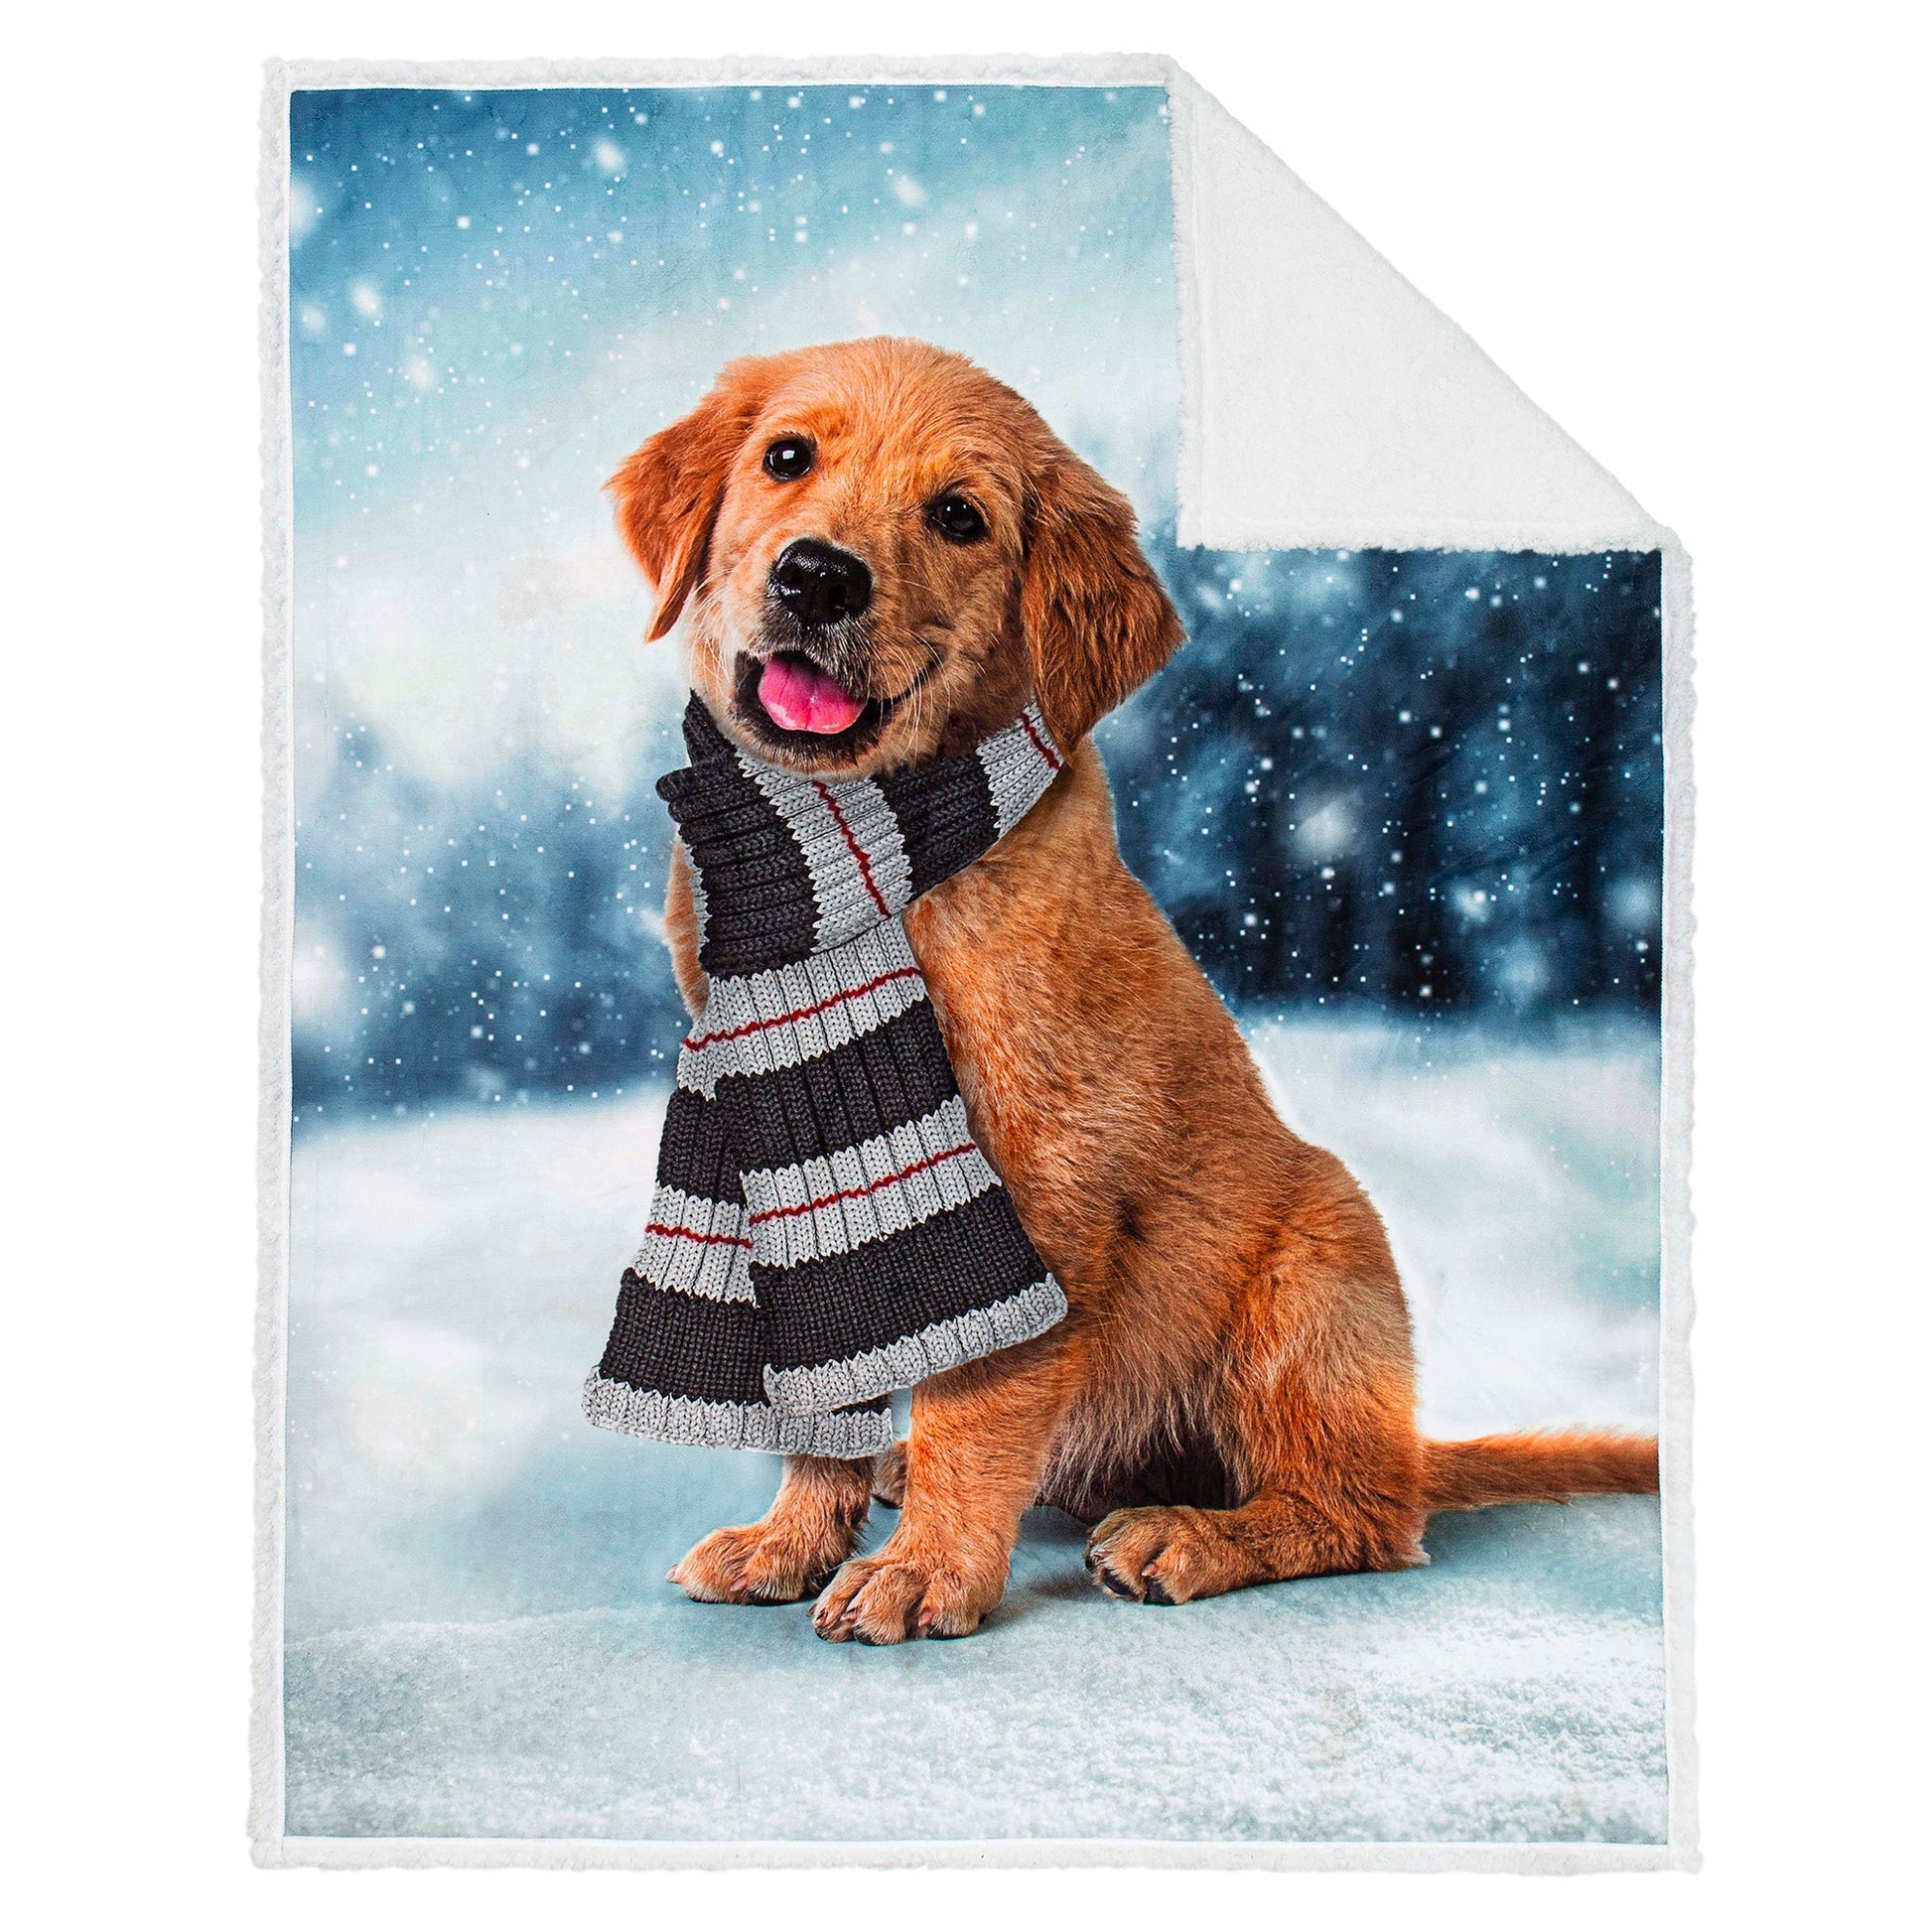 Super Soft Photoreal Reversible Blanket Throw Sherpa Home Decor Bedding 48X60 Scarf Puppy